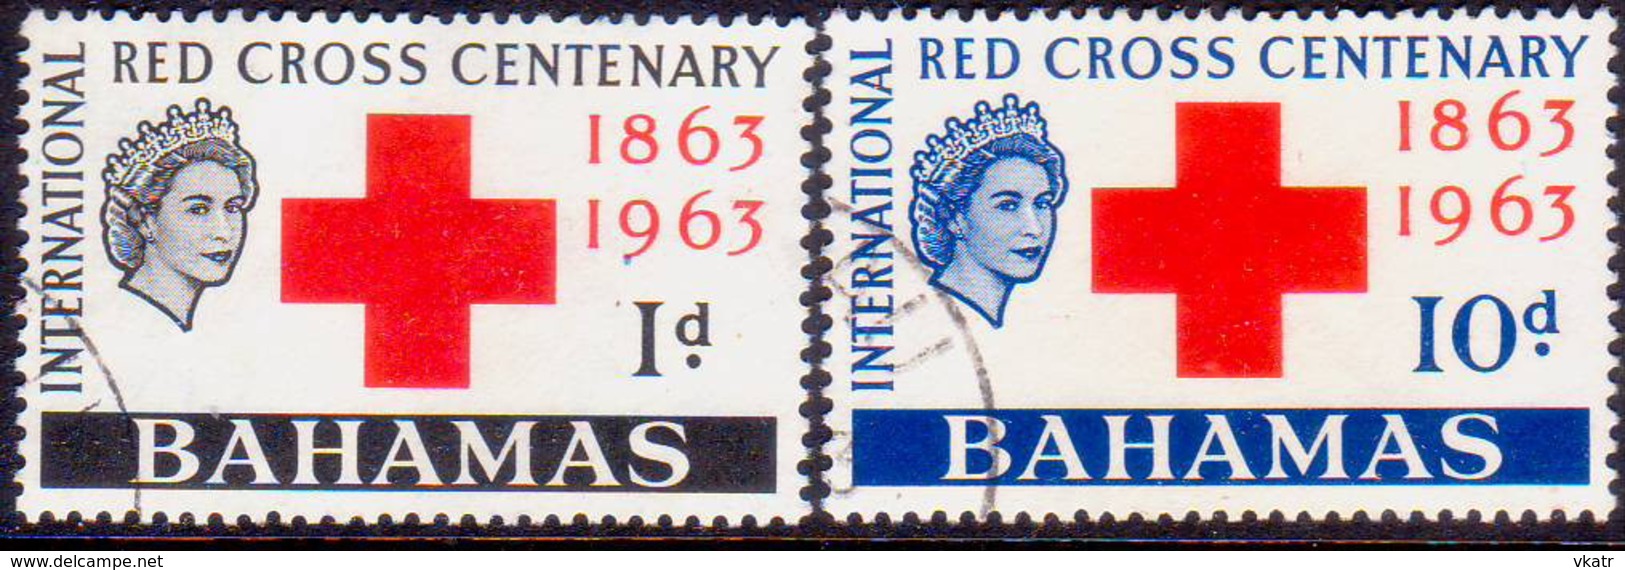 BAHAMAS 1963 SG #226-27 Compl.set Used Red Cross - 1859-1963 Crown Colony